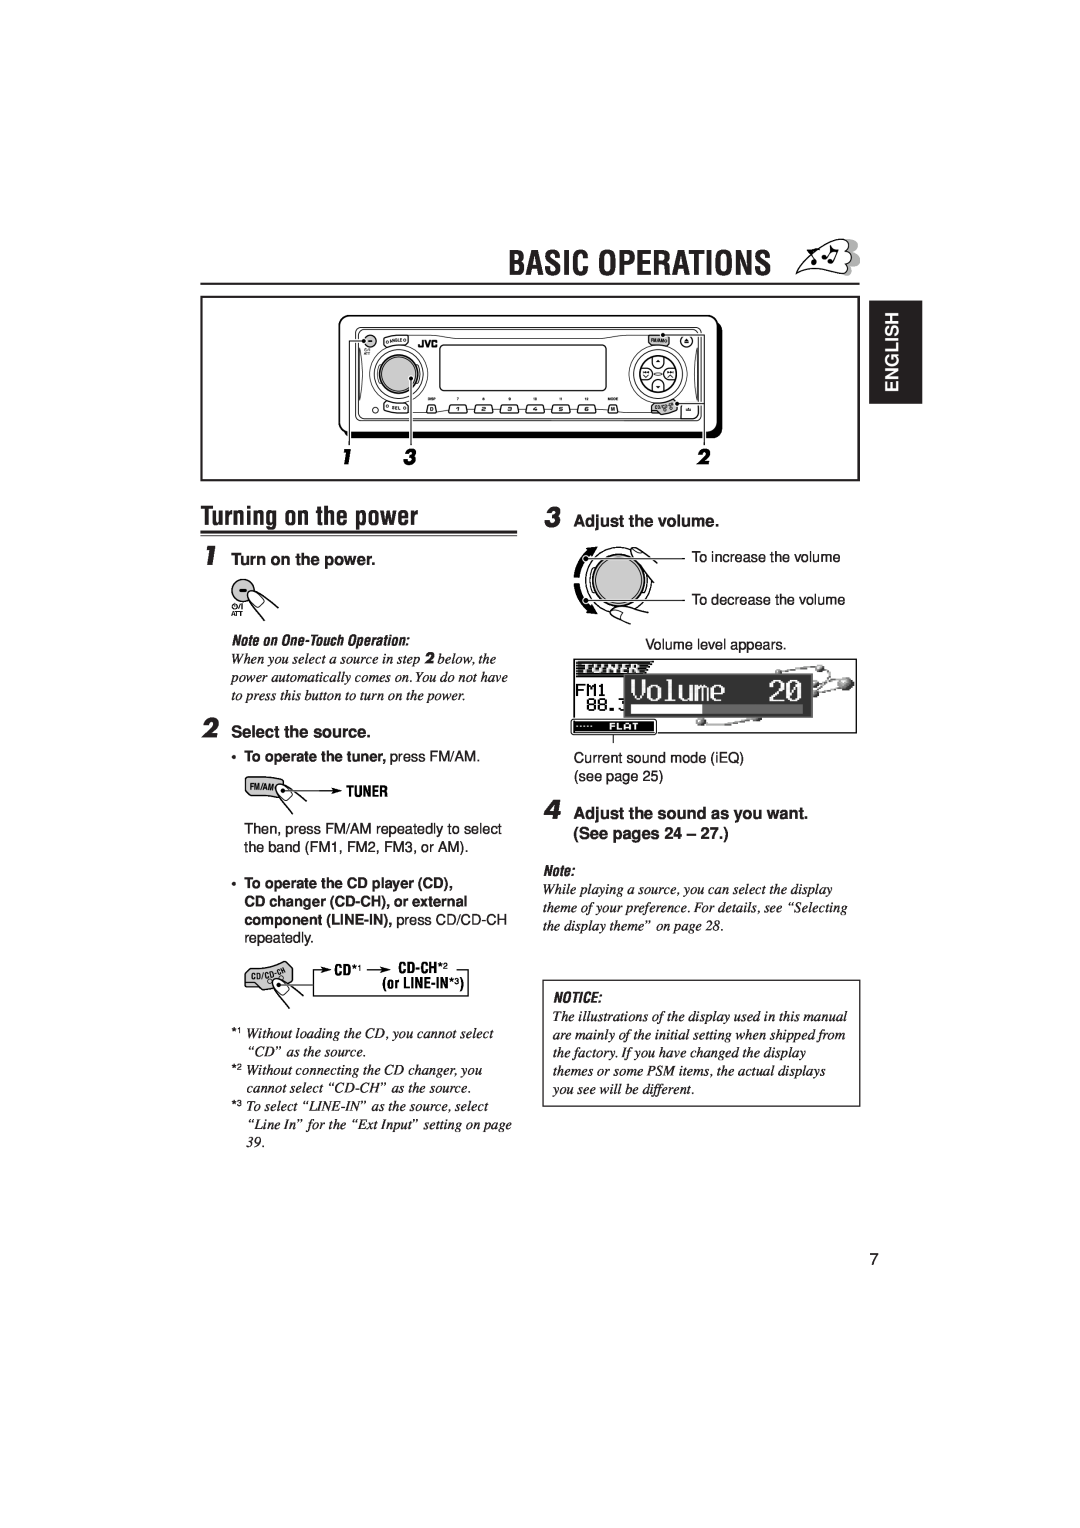 JVC KD-LH305 Turning on the power, Basic Operations, English, Turn on the power, Select the source, Adjust the volume 